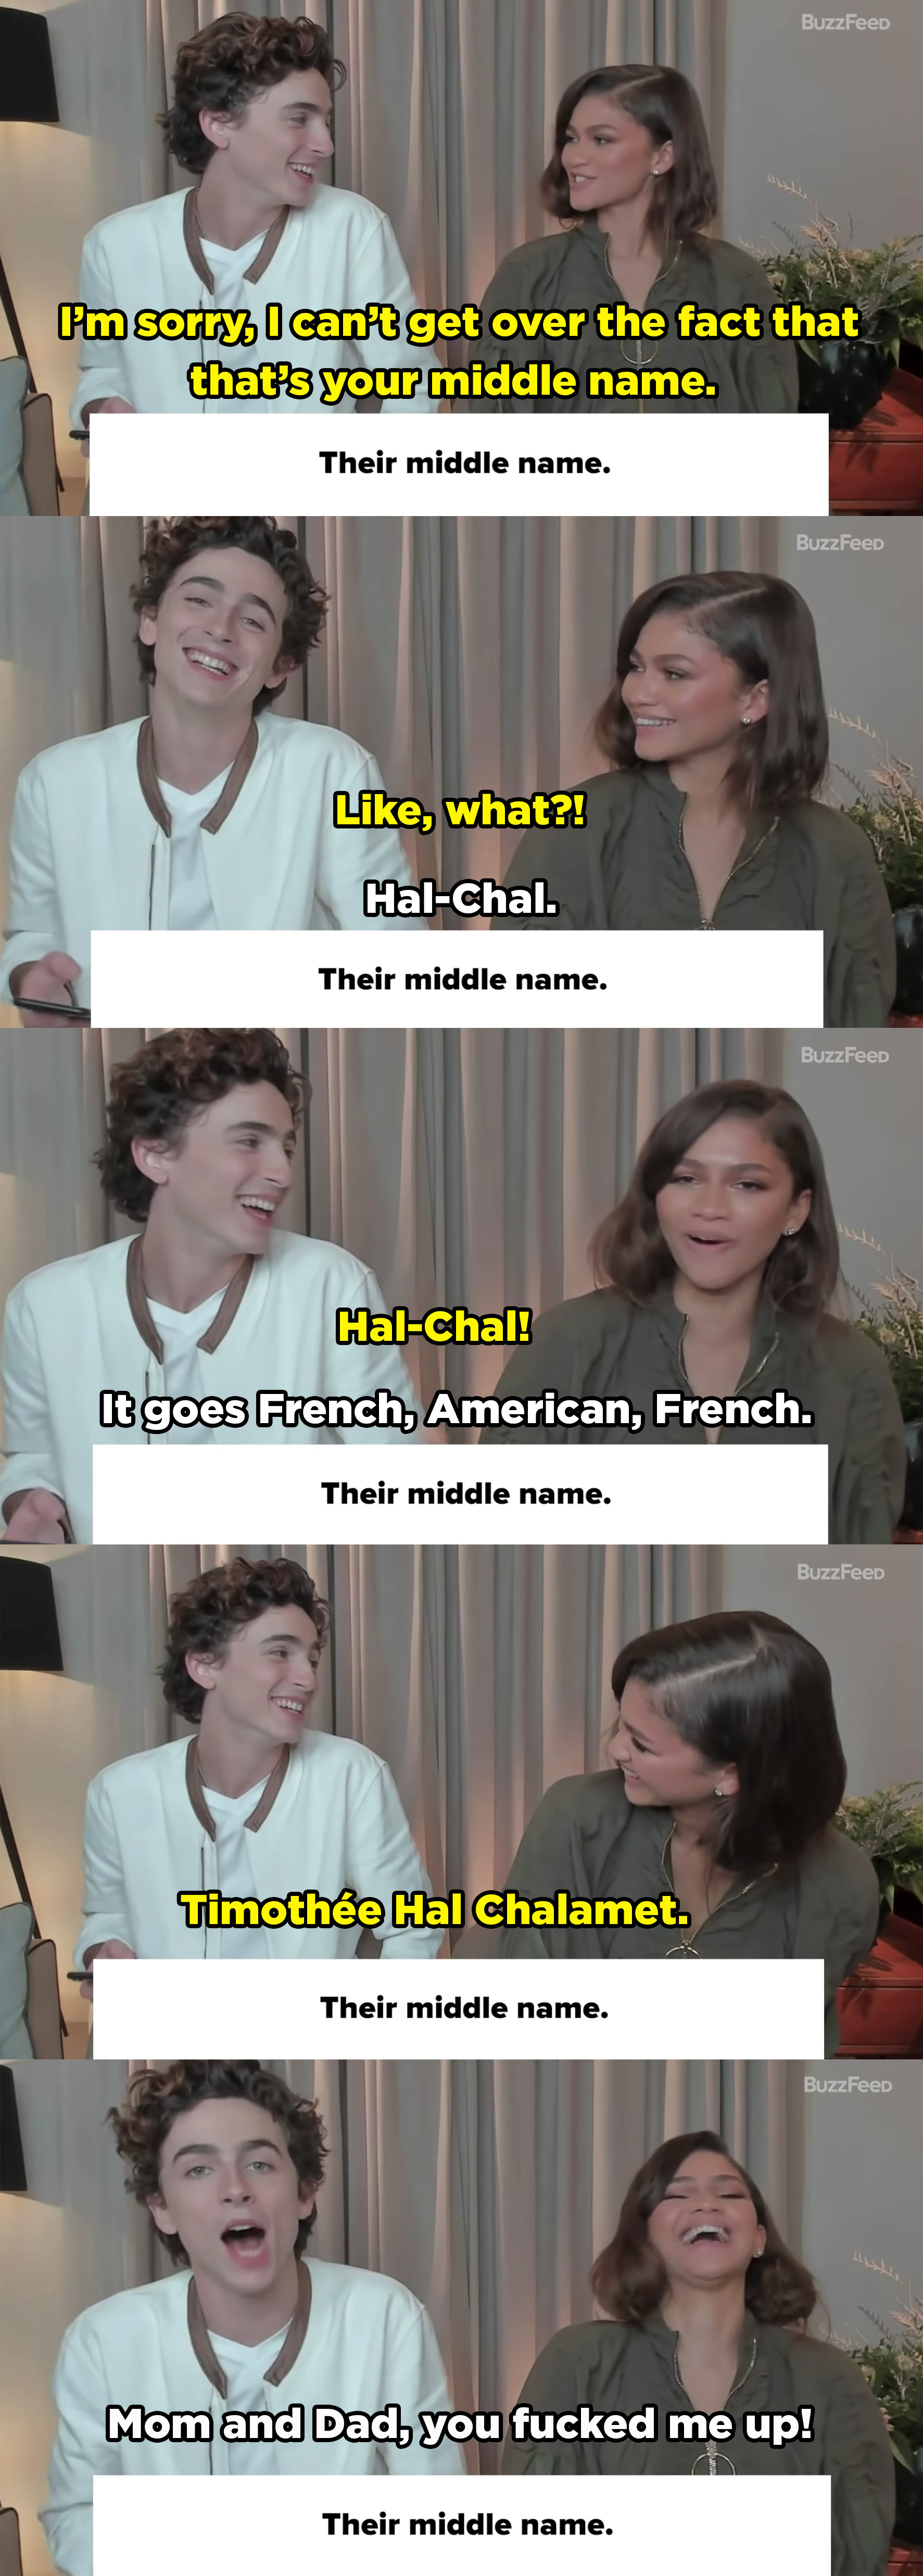 Zendaya says she can&#x27;t get over Timmy&#x27;s middle name being Hal. Then they joke about &quot;Hal Chal&quot; And Timmy explains his name goes French, American, French. He then jokes that his parents fucked him up.